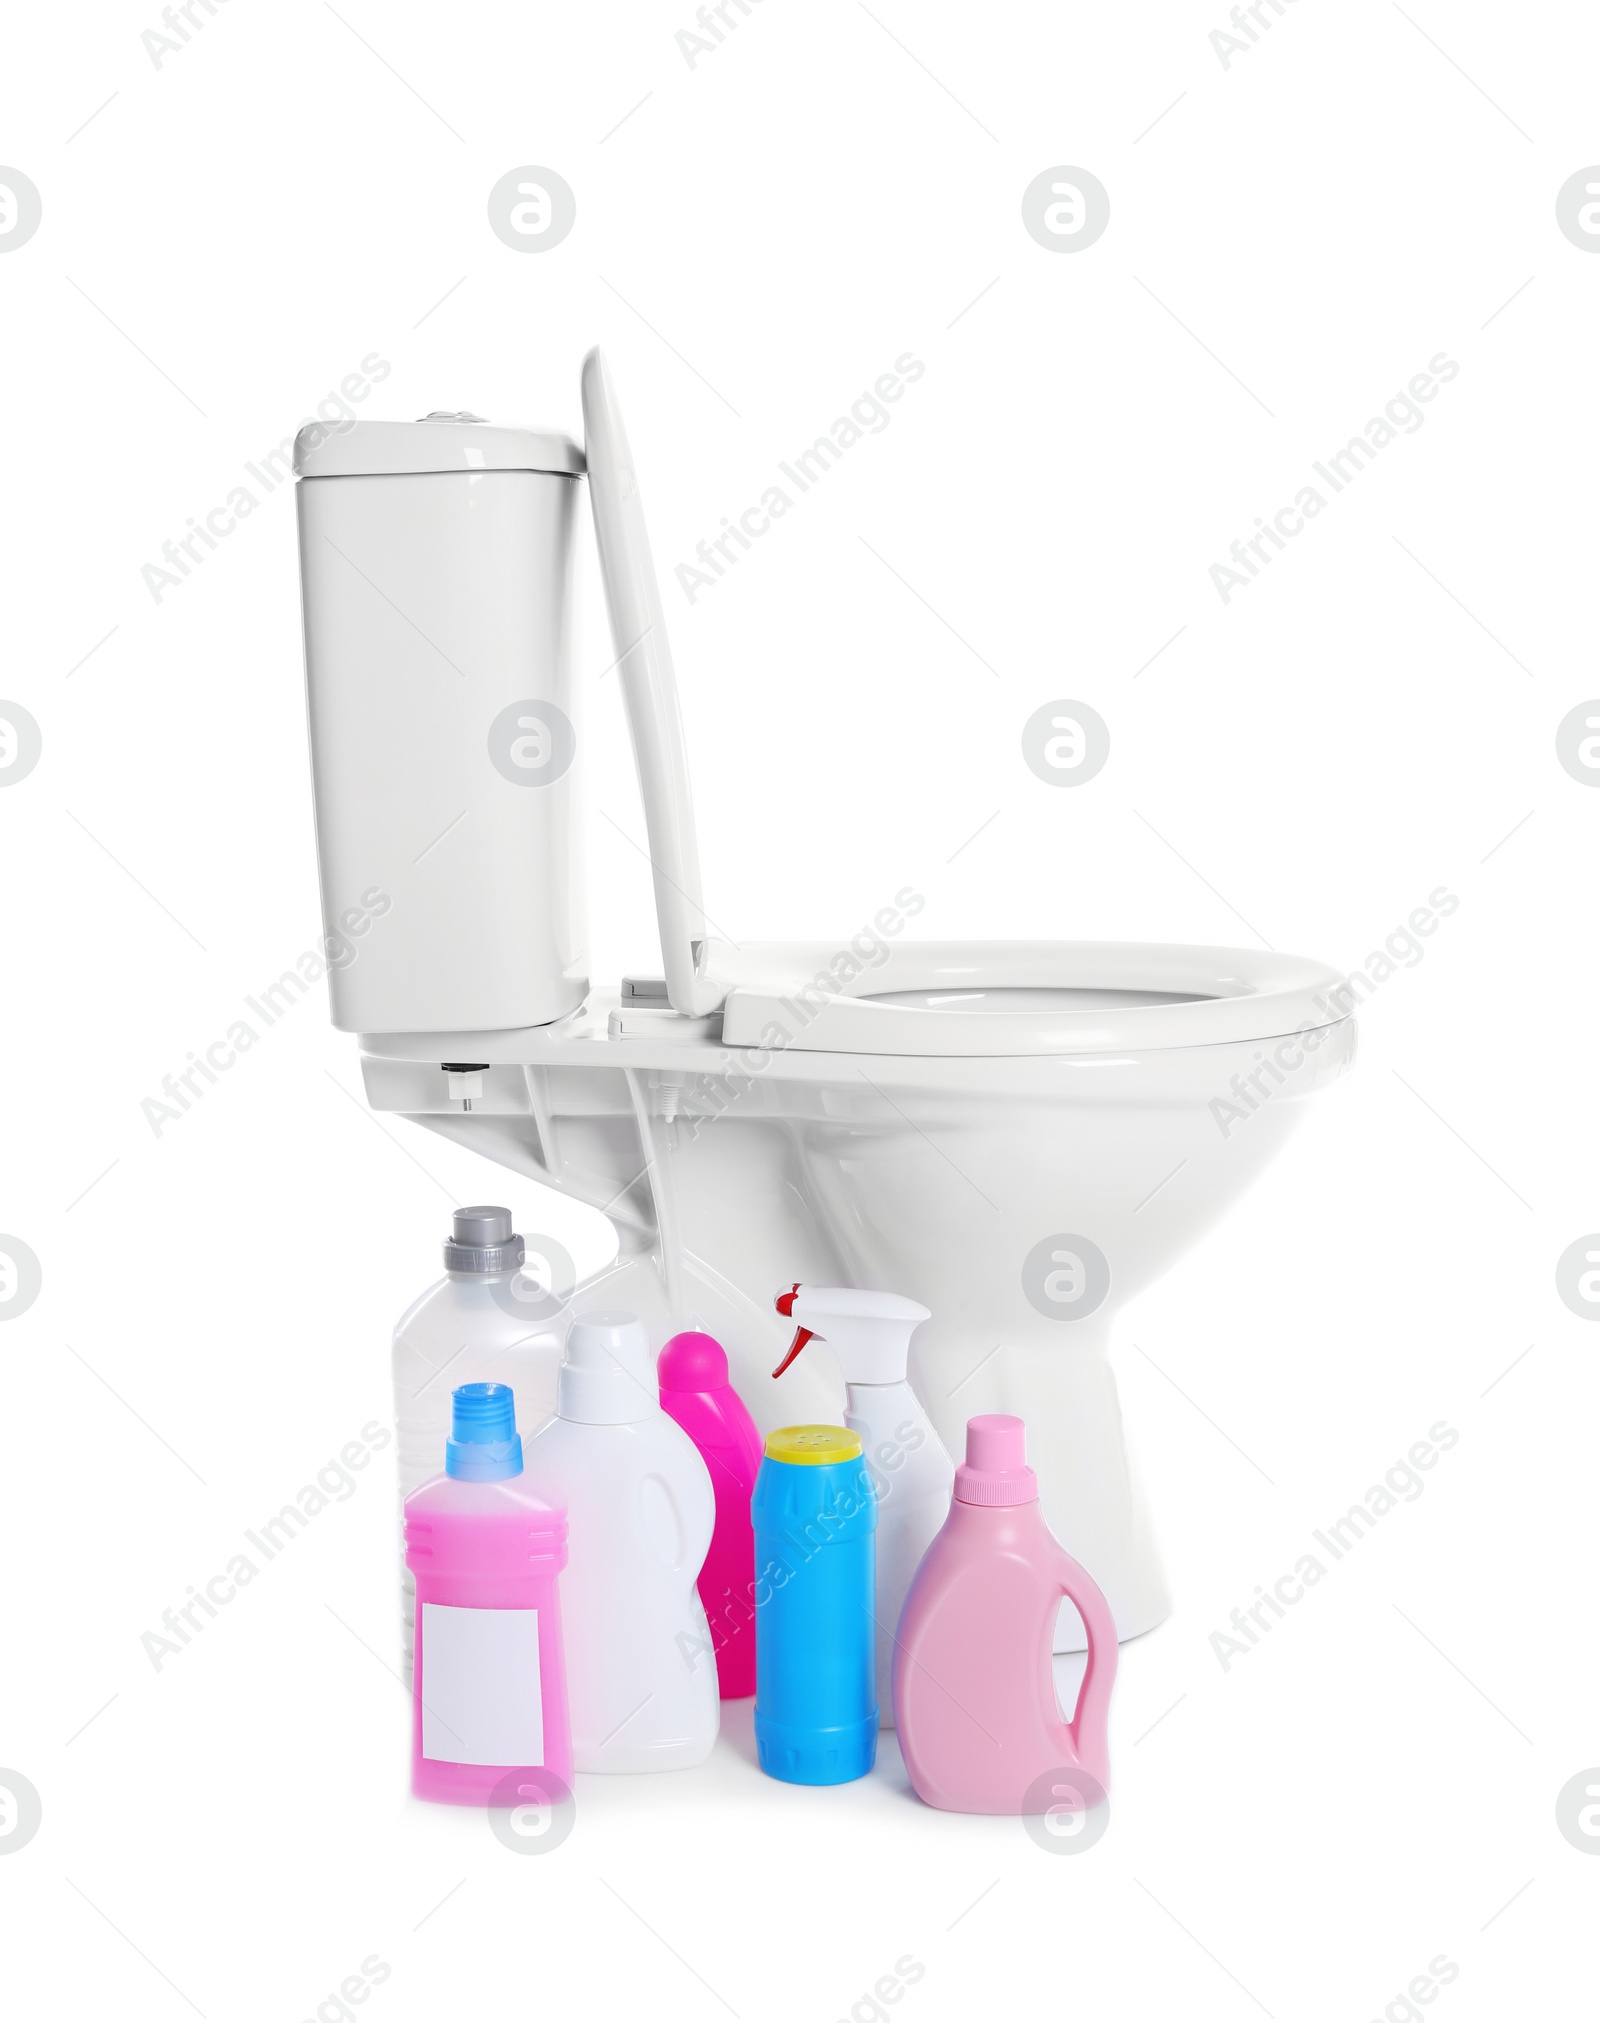 Photo of New ceramic toilet bowl and bottles of detergent on white background